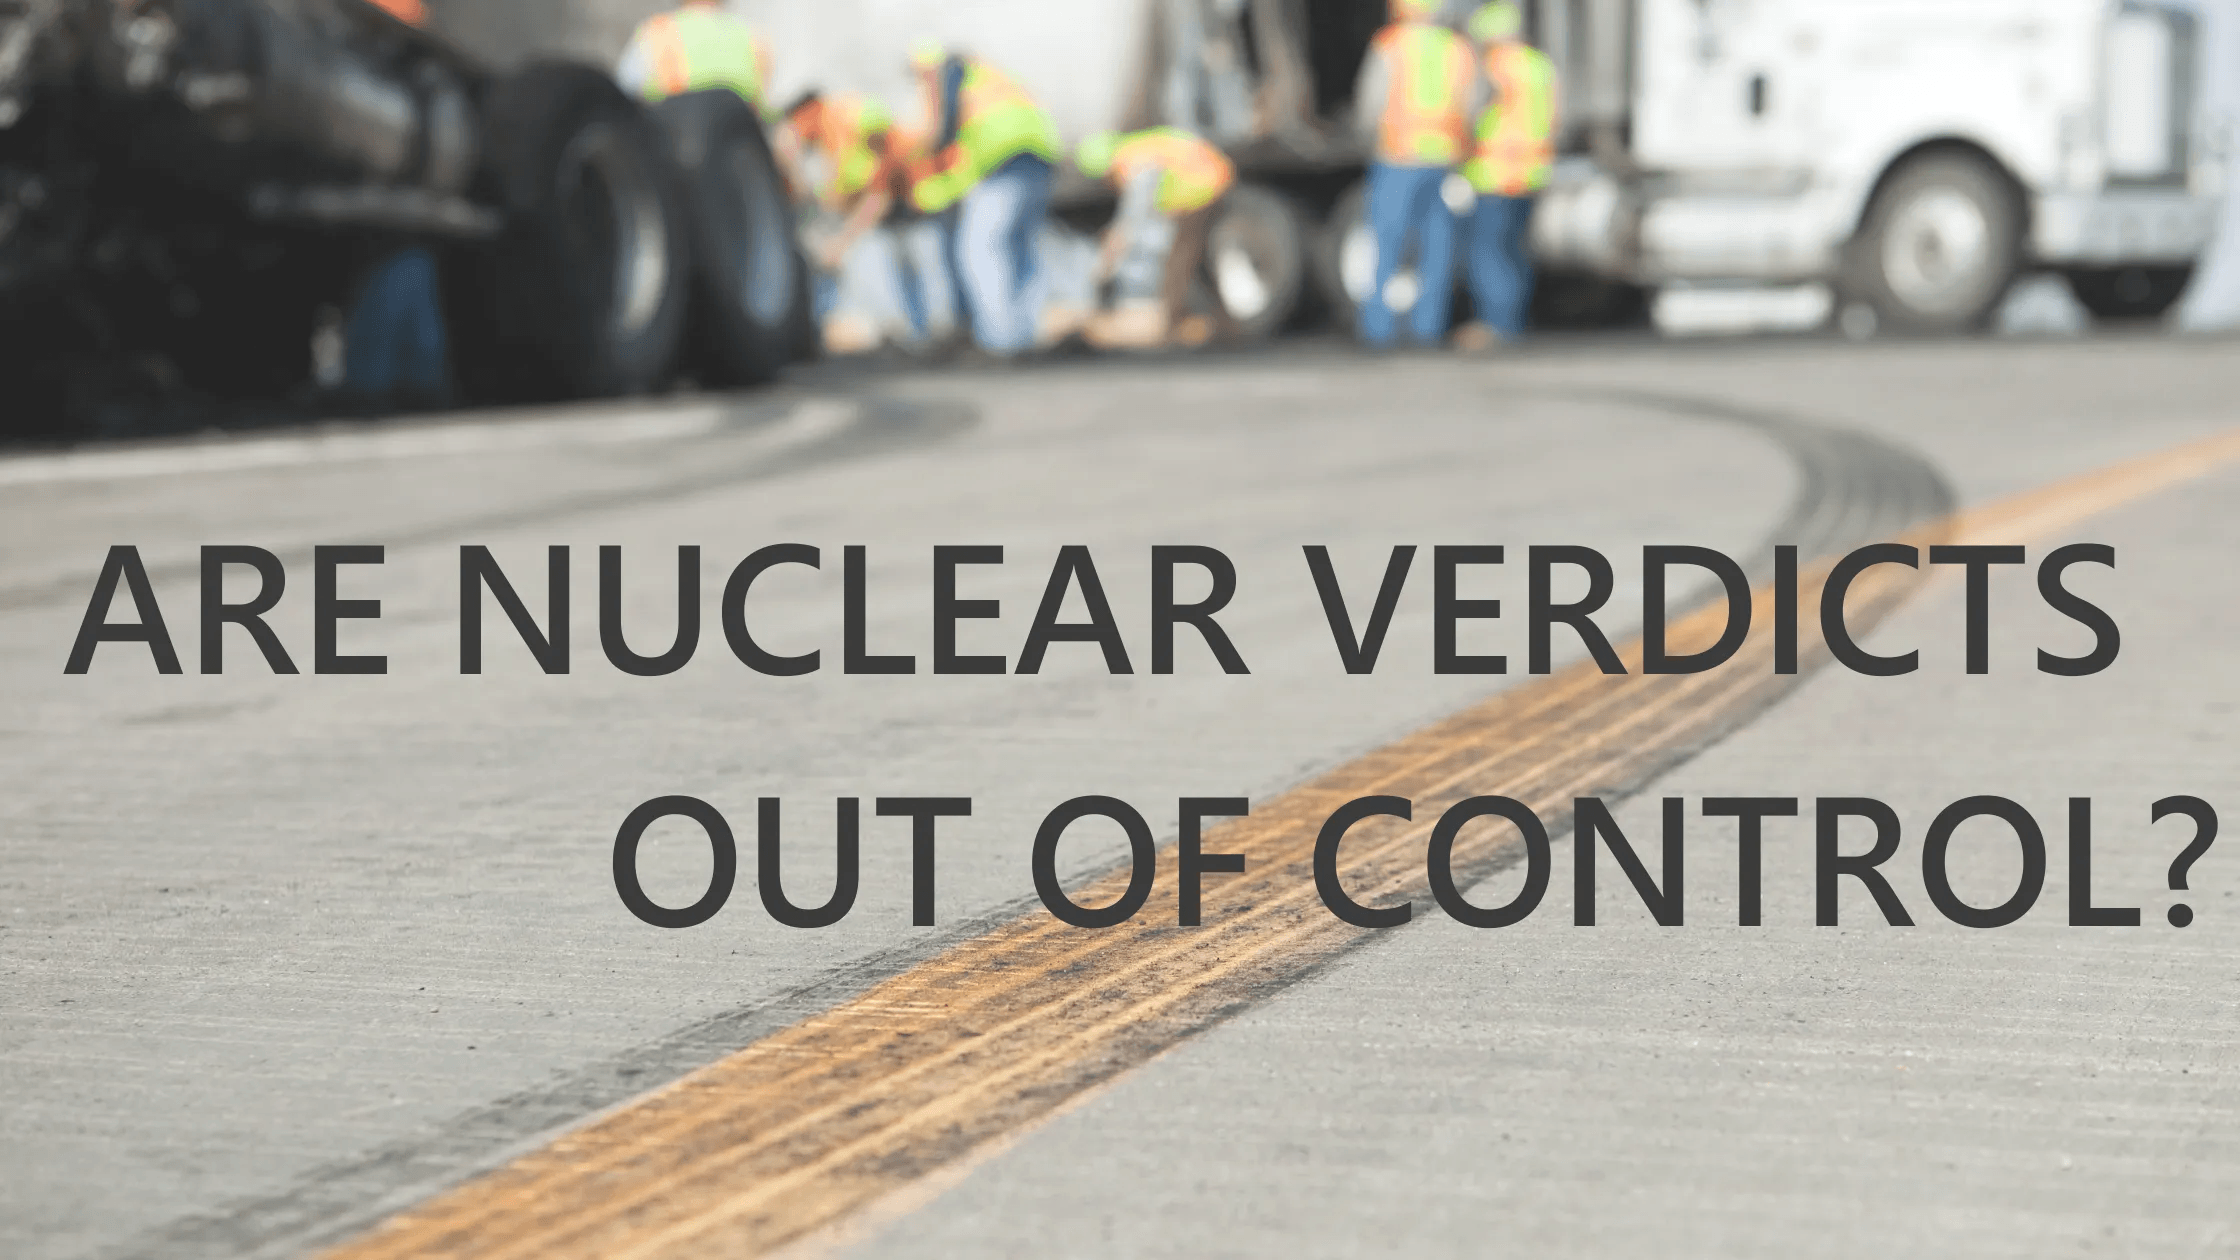 are nuclear verdicts out of control title text in front of a blurred construction site